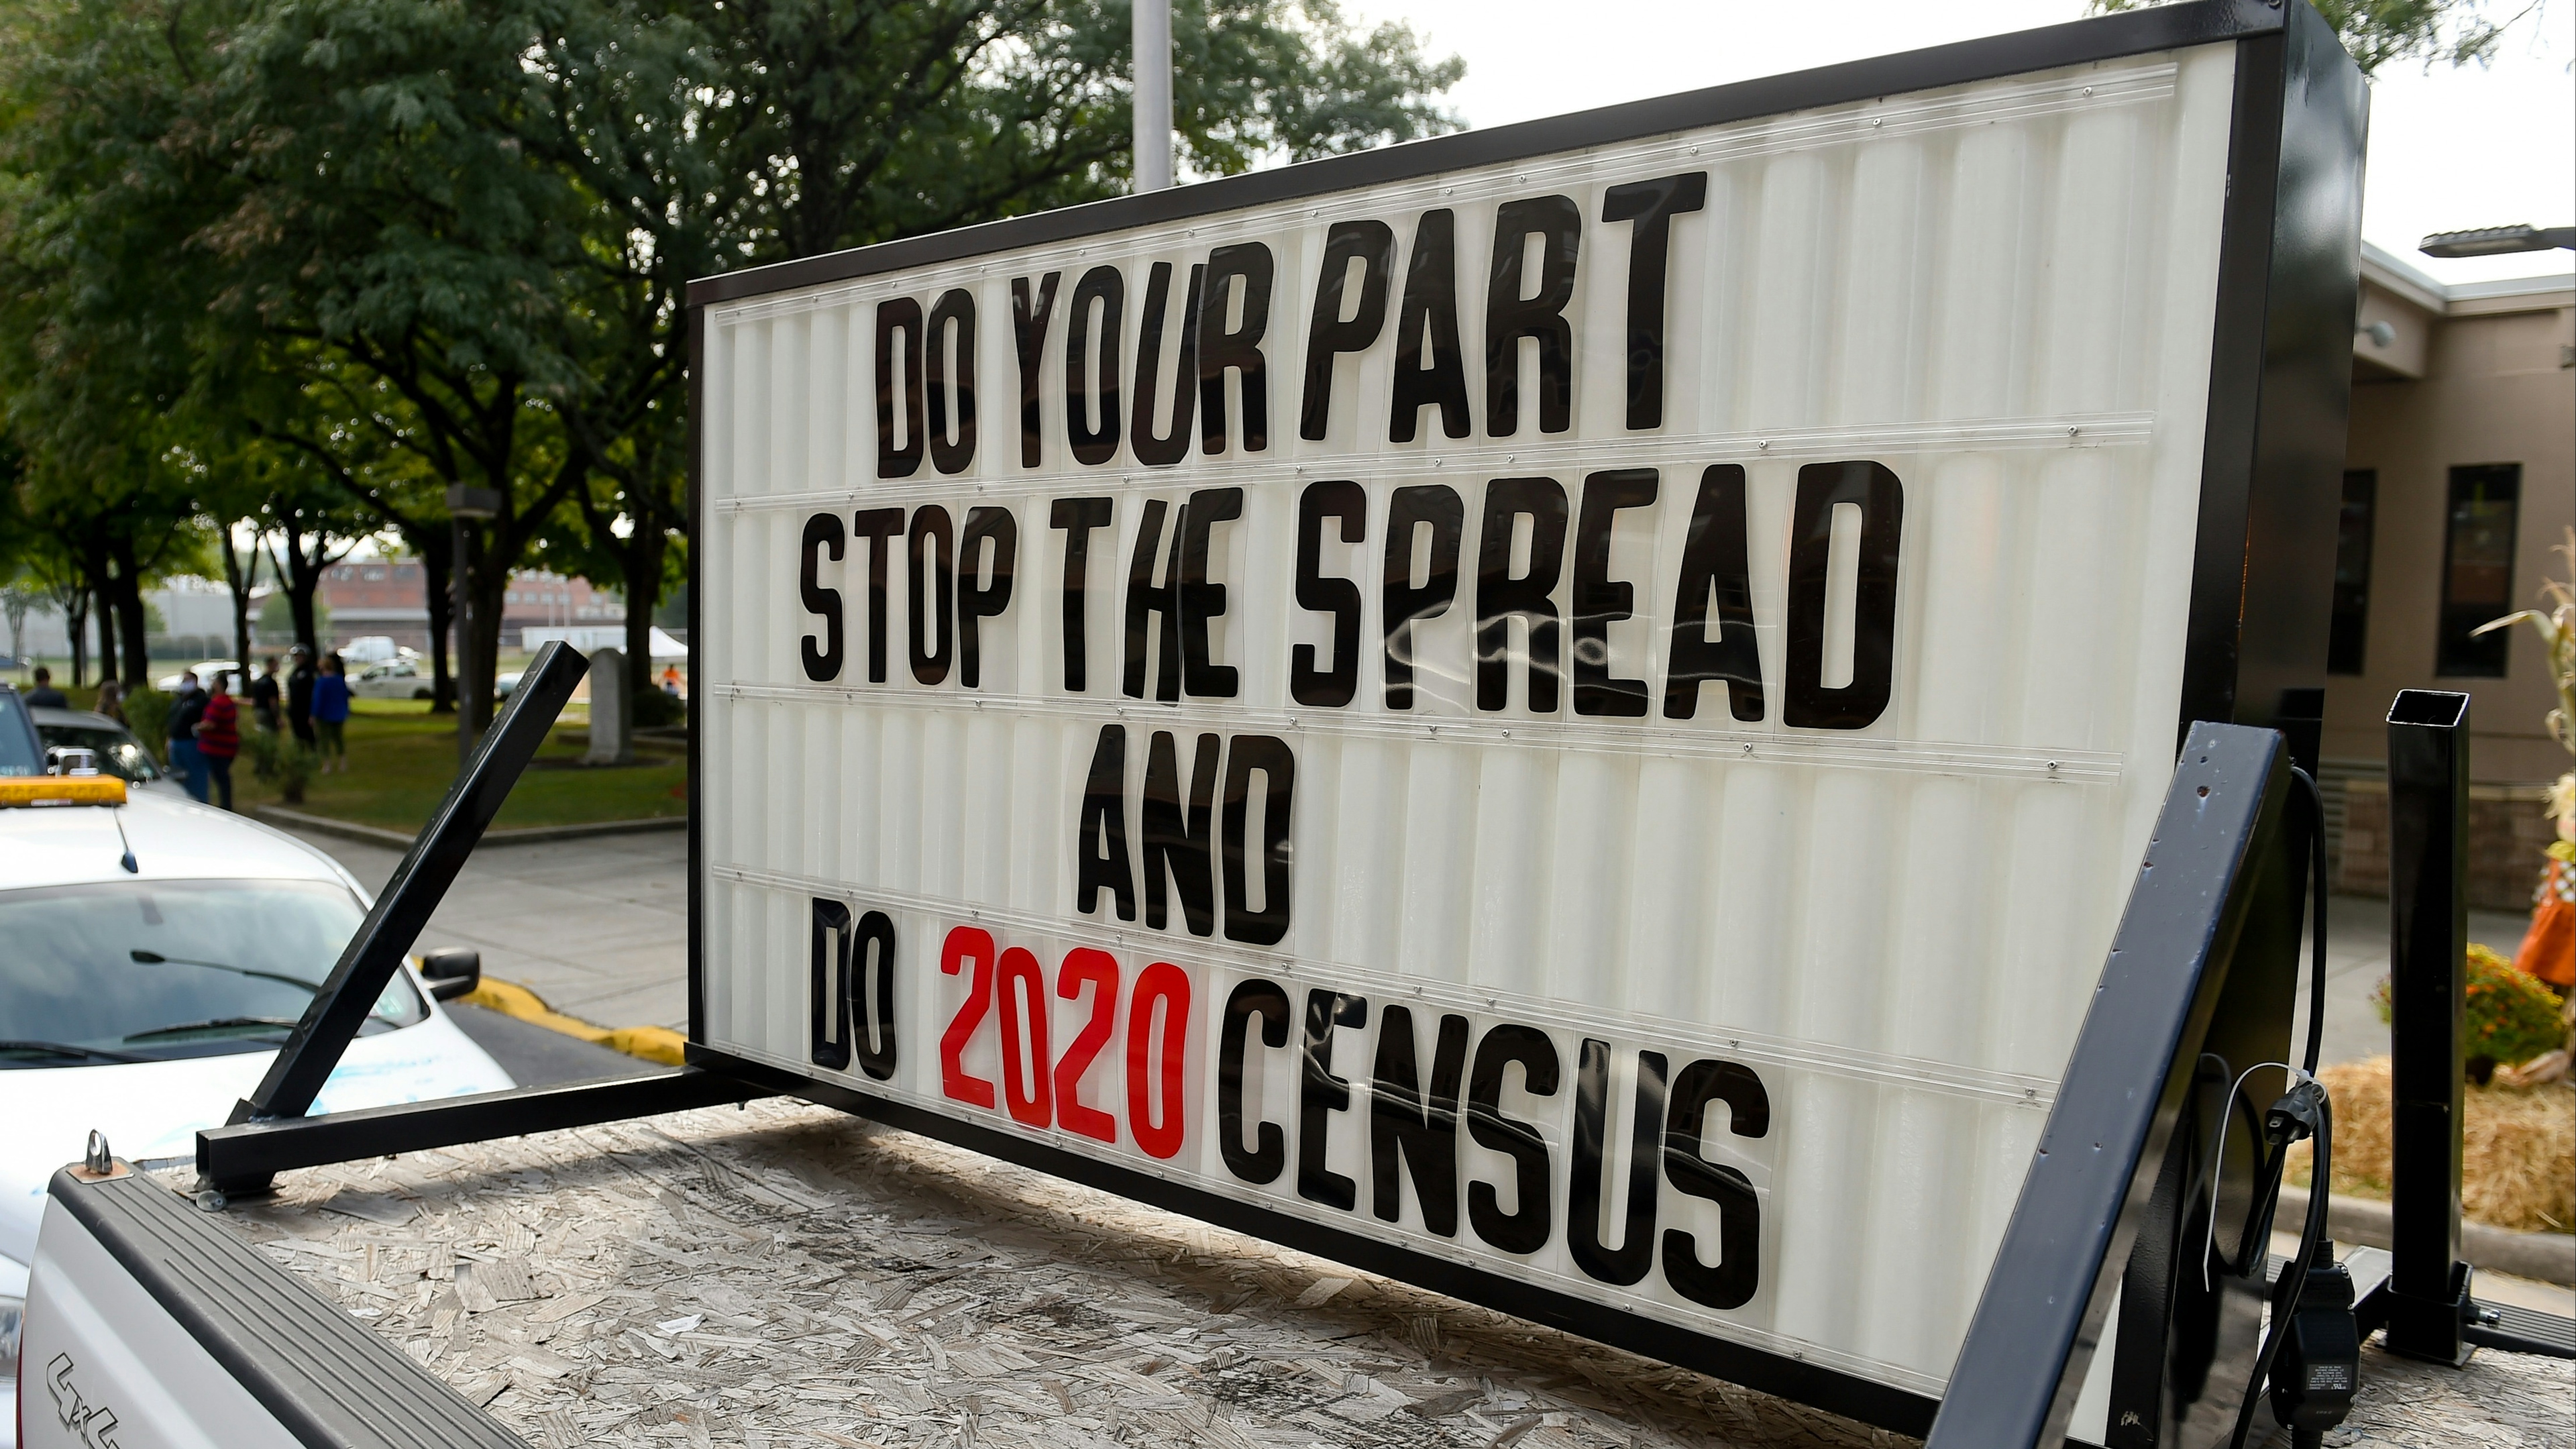 A sign on the back of a truck in the caravan that reads "Do your part, stop the spread and do 2020 Census."